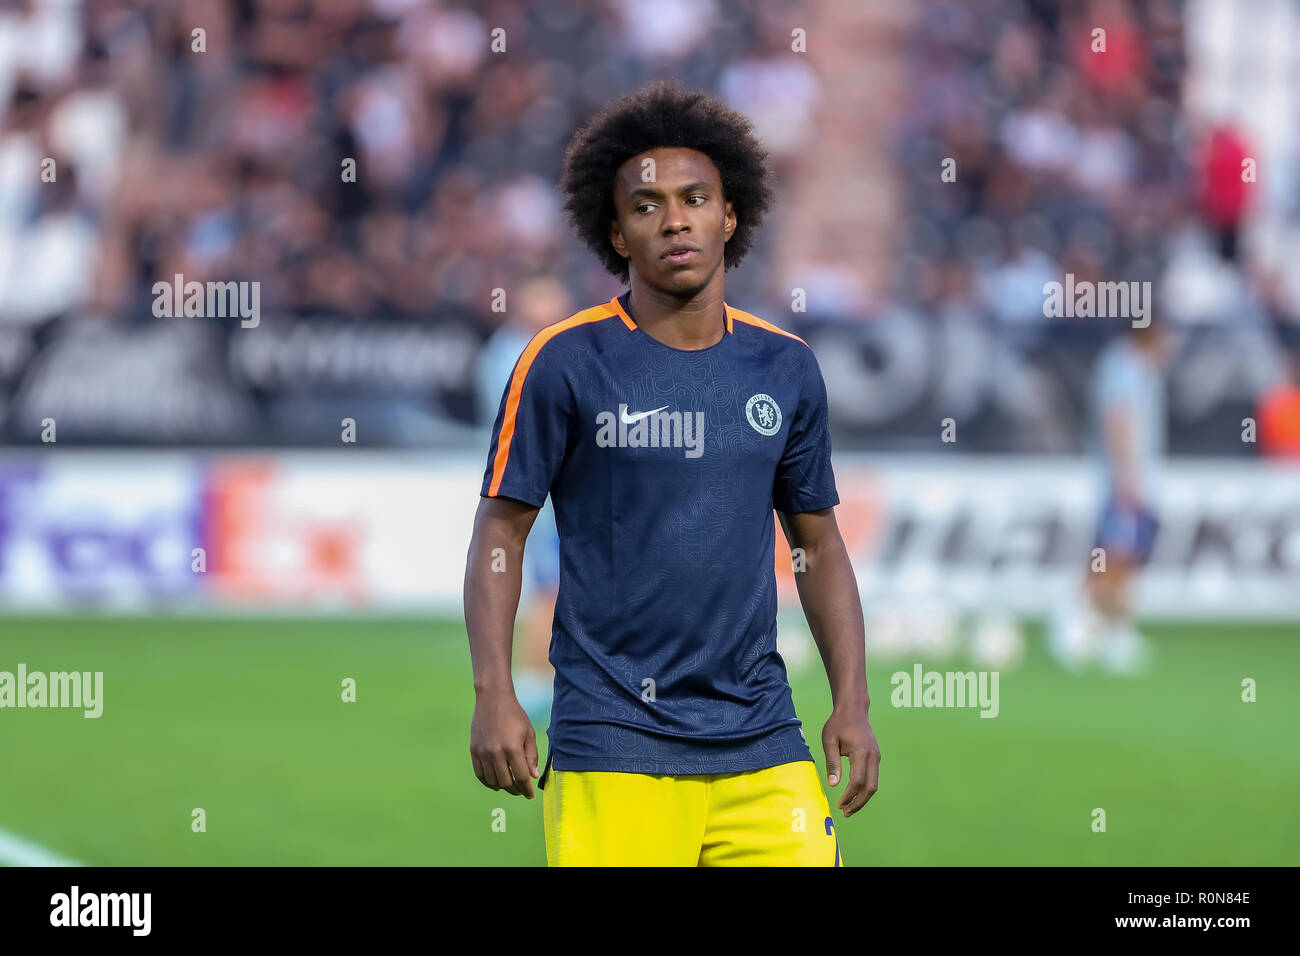 Thessaloniki, Greece - Sept 20, 2018: Player of Chelsea Willian Borges da Silva in action during the UEFA Europa League between PAOK vs FC Chelsea pla Stock Photo